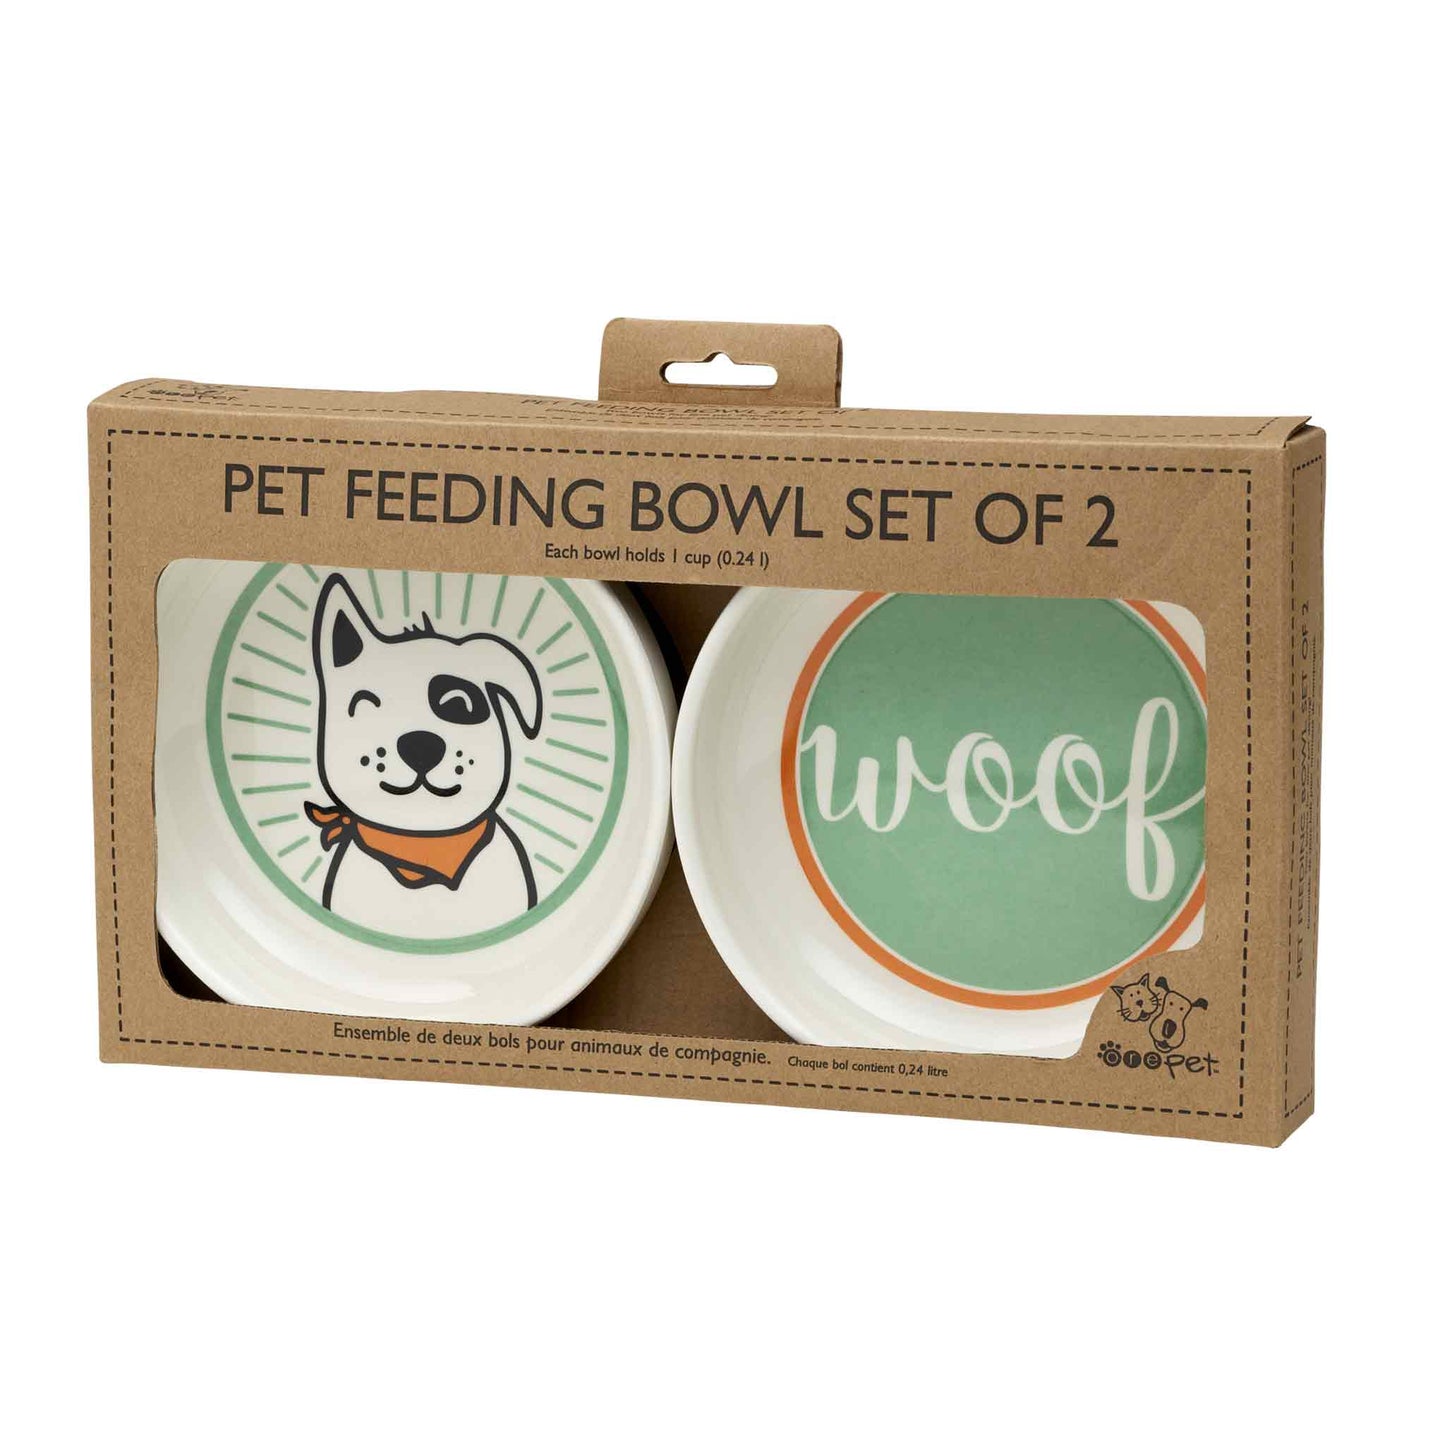 front of 2 bowls in natural cardboard packaging with text "PET FEEDING BOWL SET OF 2"